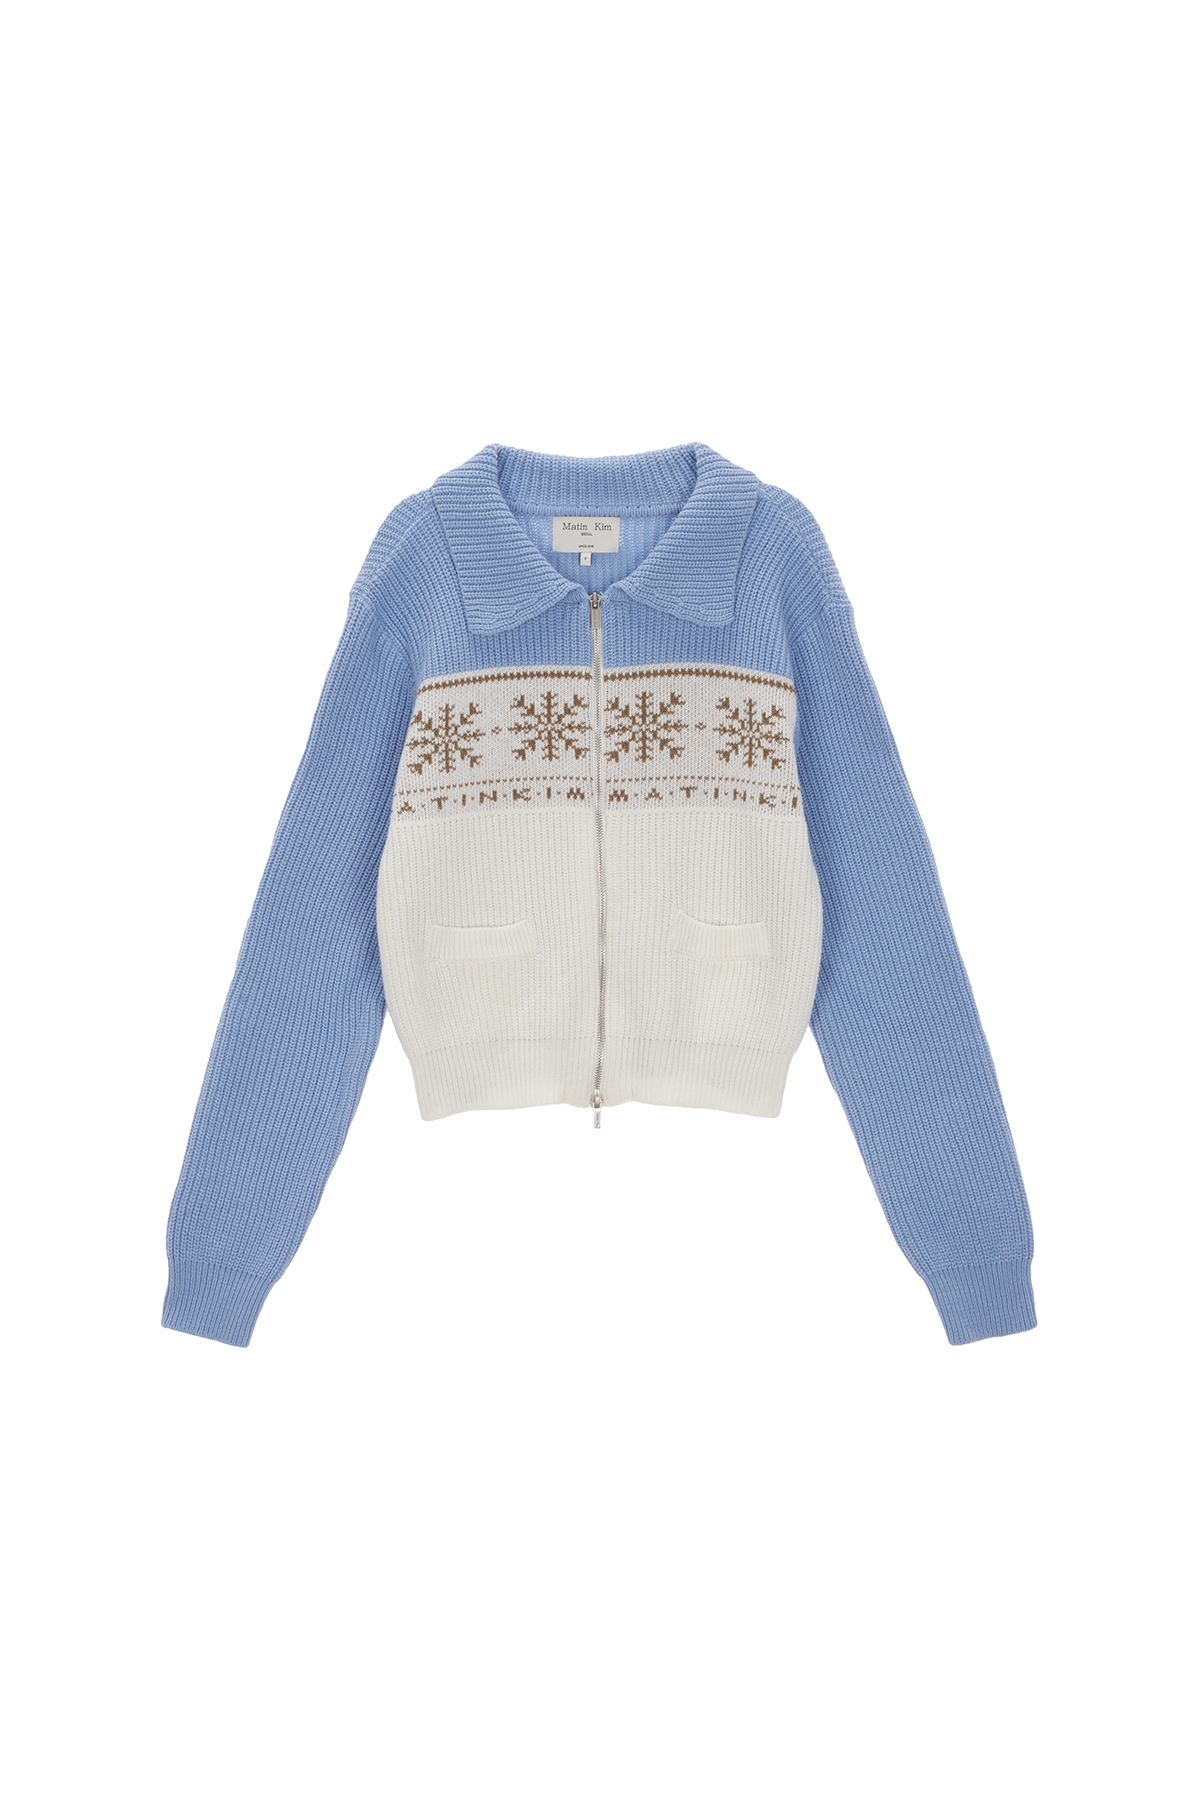 MATIN SNOWFLAKE KNIT ZIP UP IN BLUE